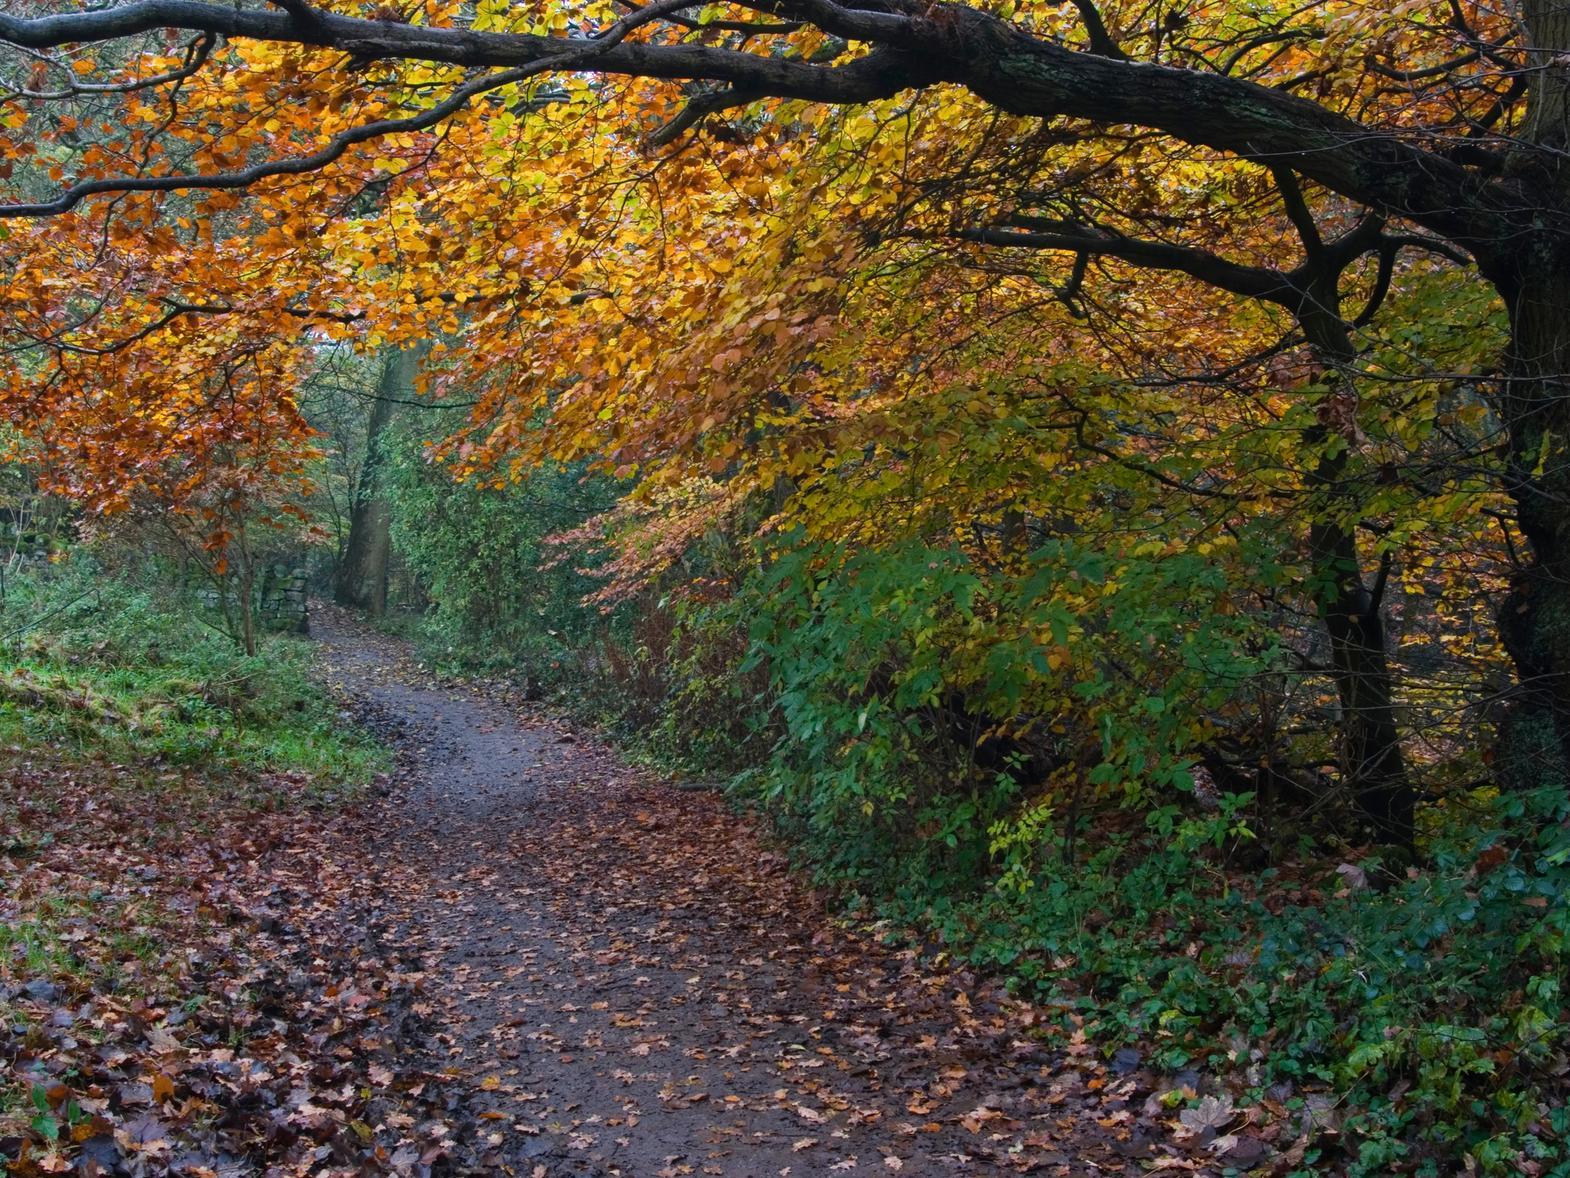 Located in Meanwood Park, The Hollies is a secret old Oak woodland which offers stunning scenery. This natural botanical garden provides a beautiful backdrop for your stroll.